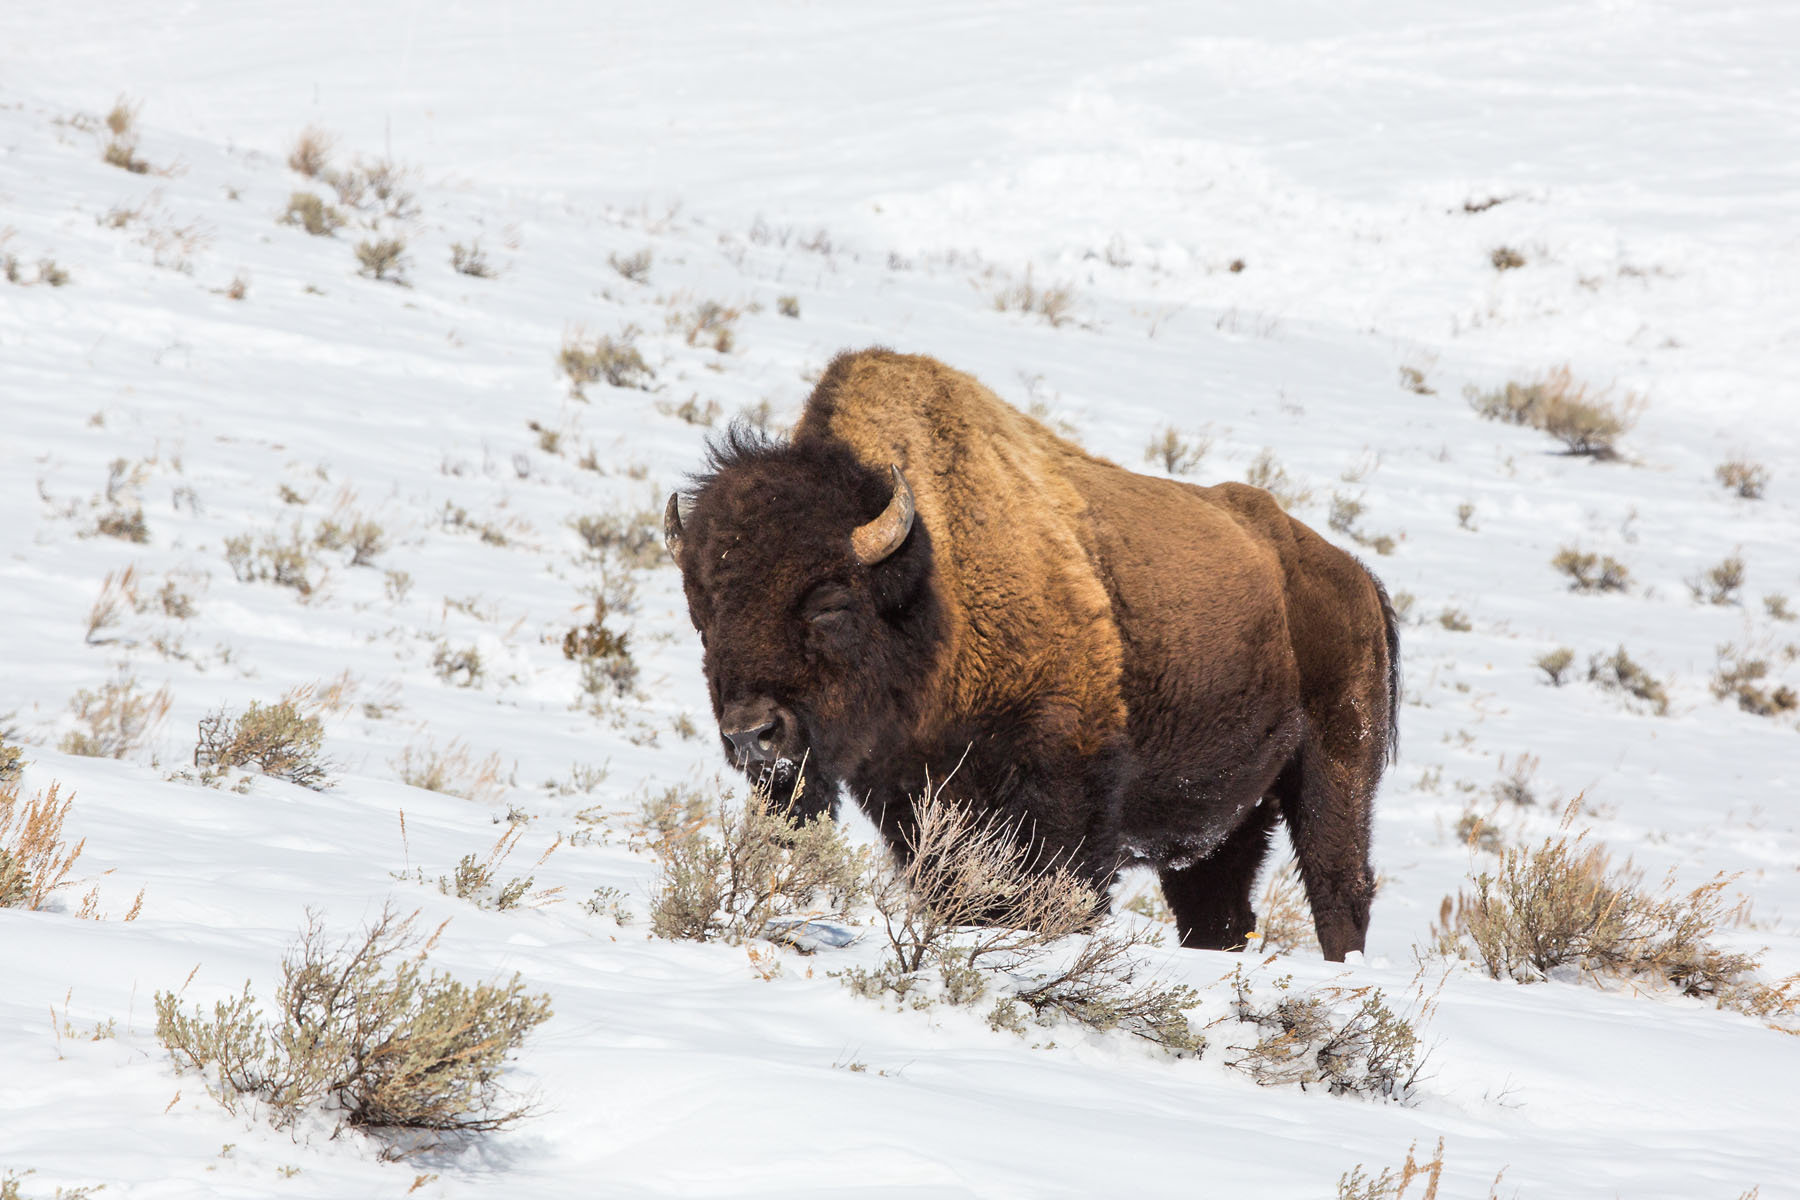 Bison, Yellowstone, March 2021.  Click for next photo.